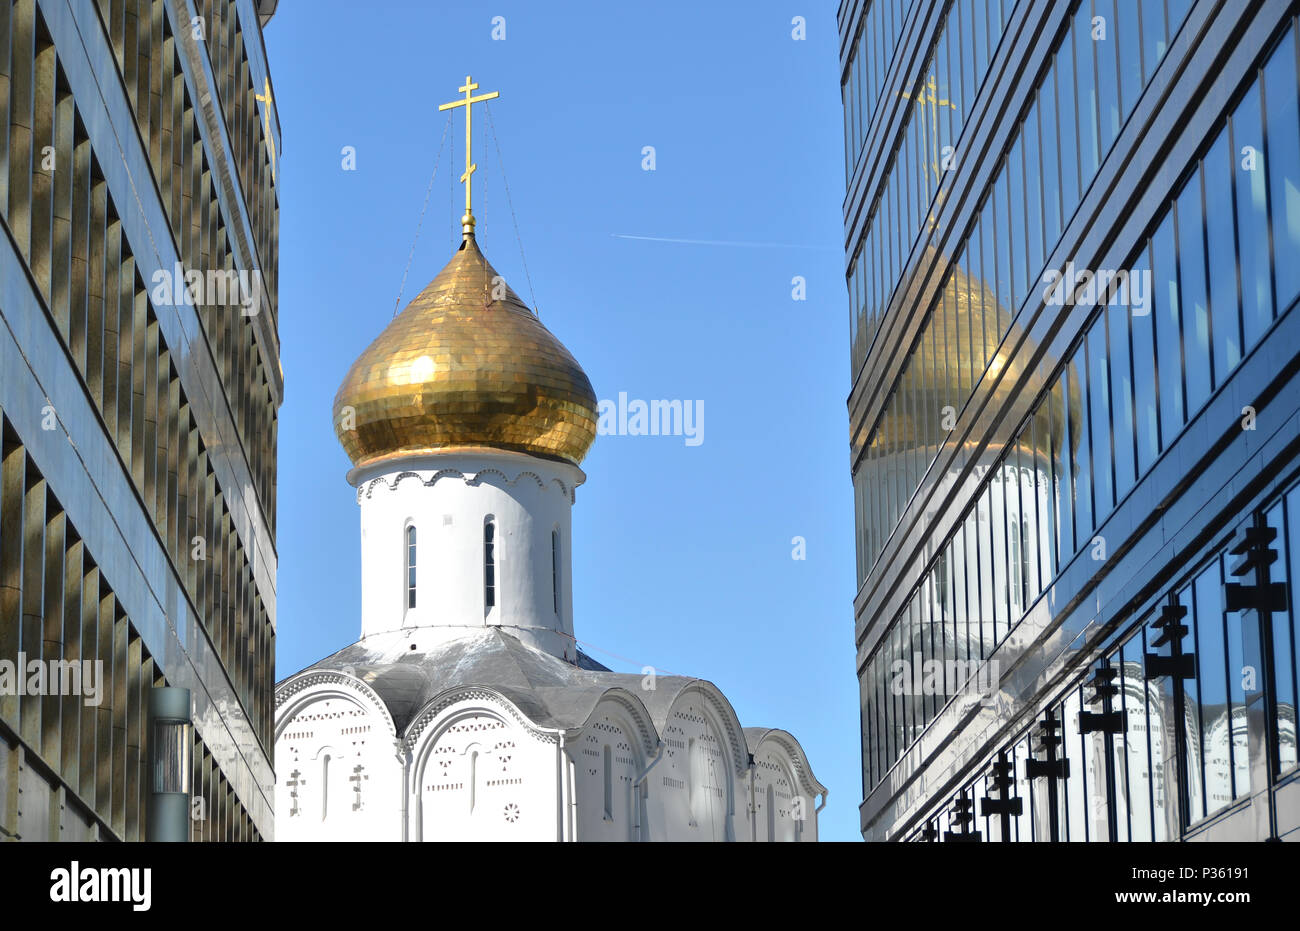 Temple of St. Nicholas. Old and new Moscow meet atTverskaya Zastava in Moscow Stock Photo